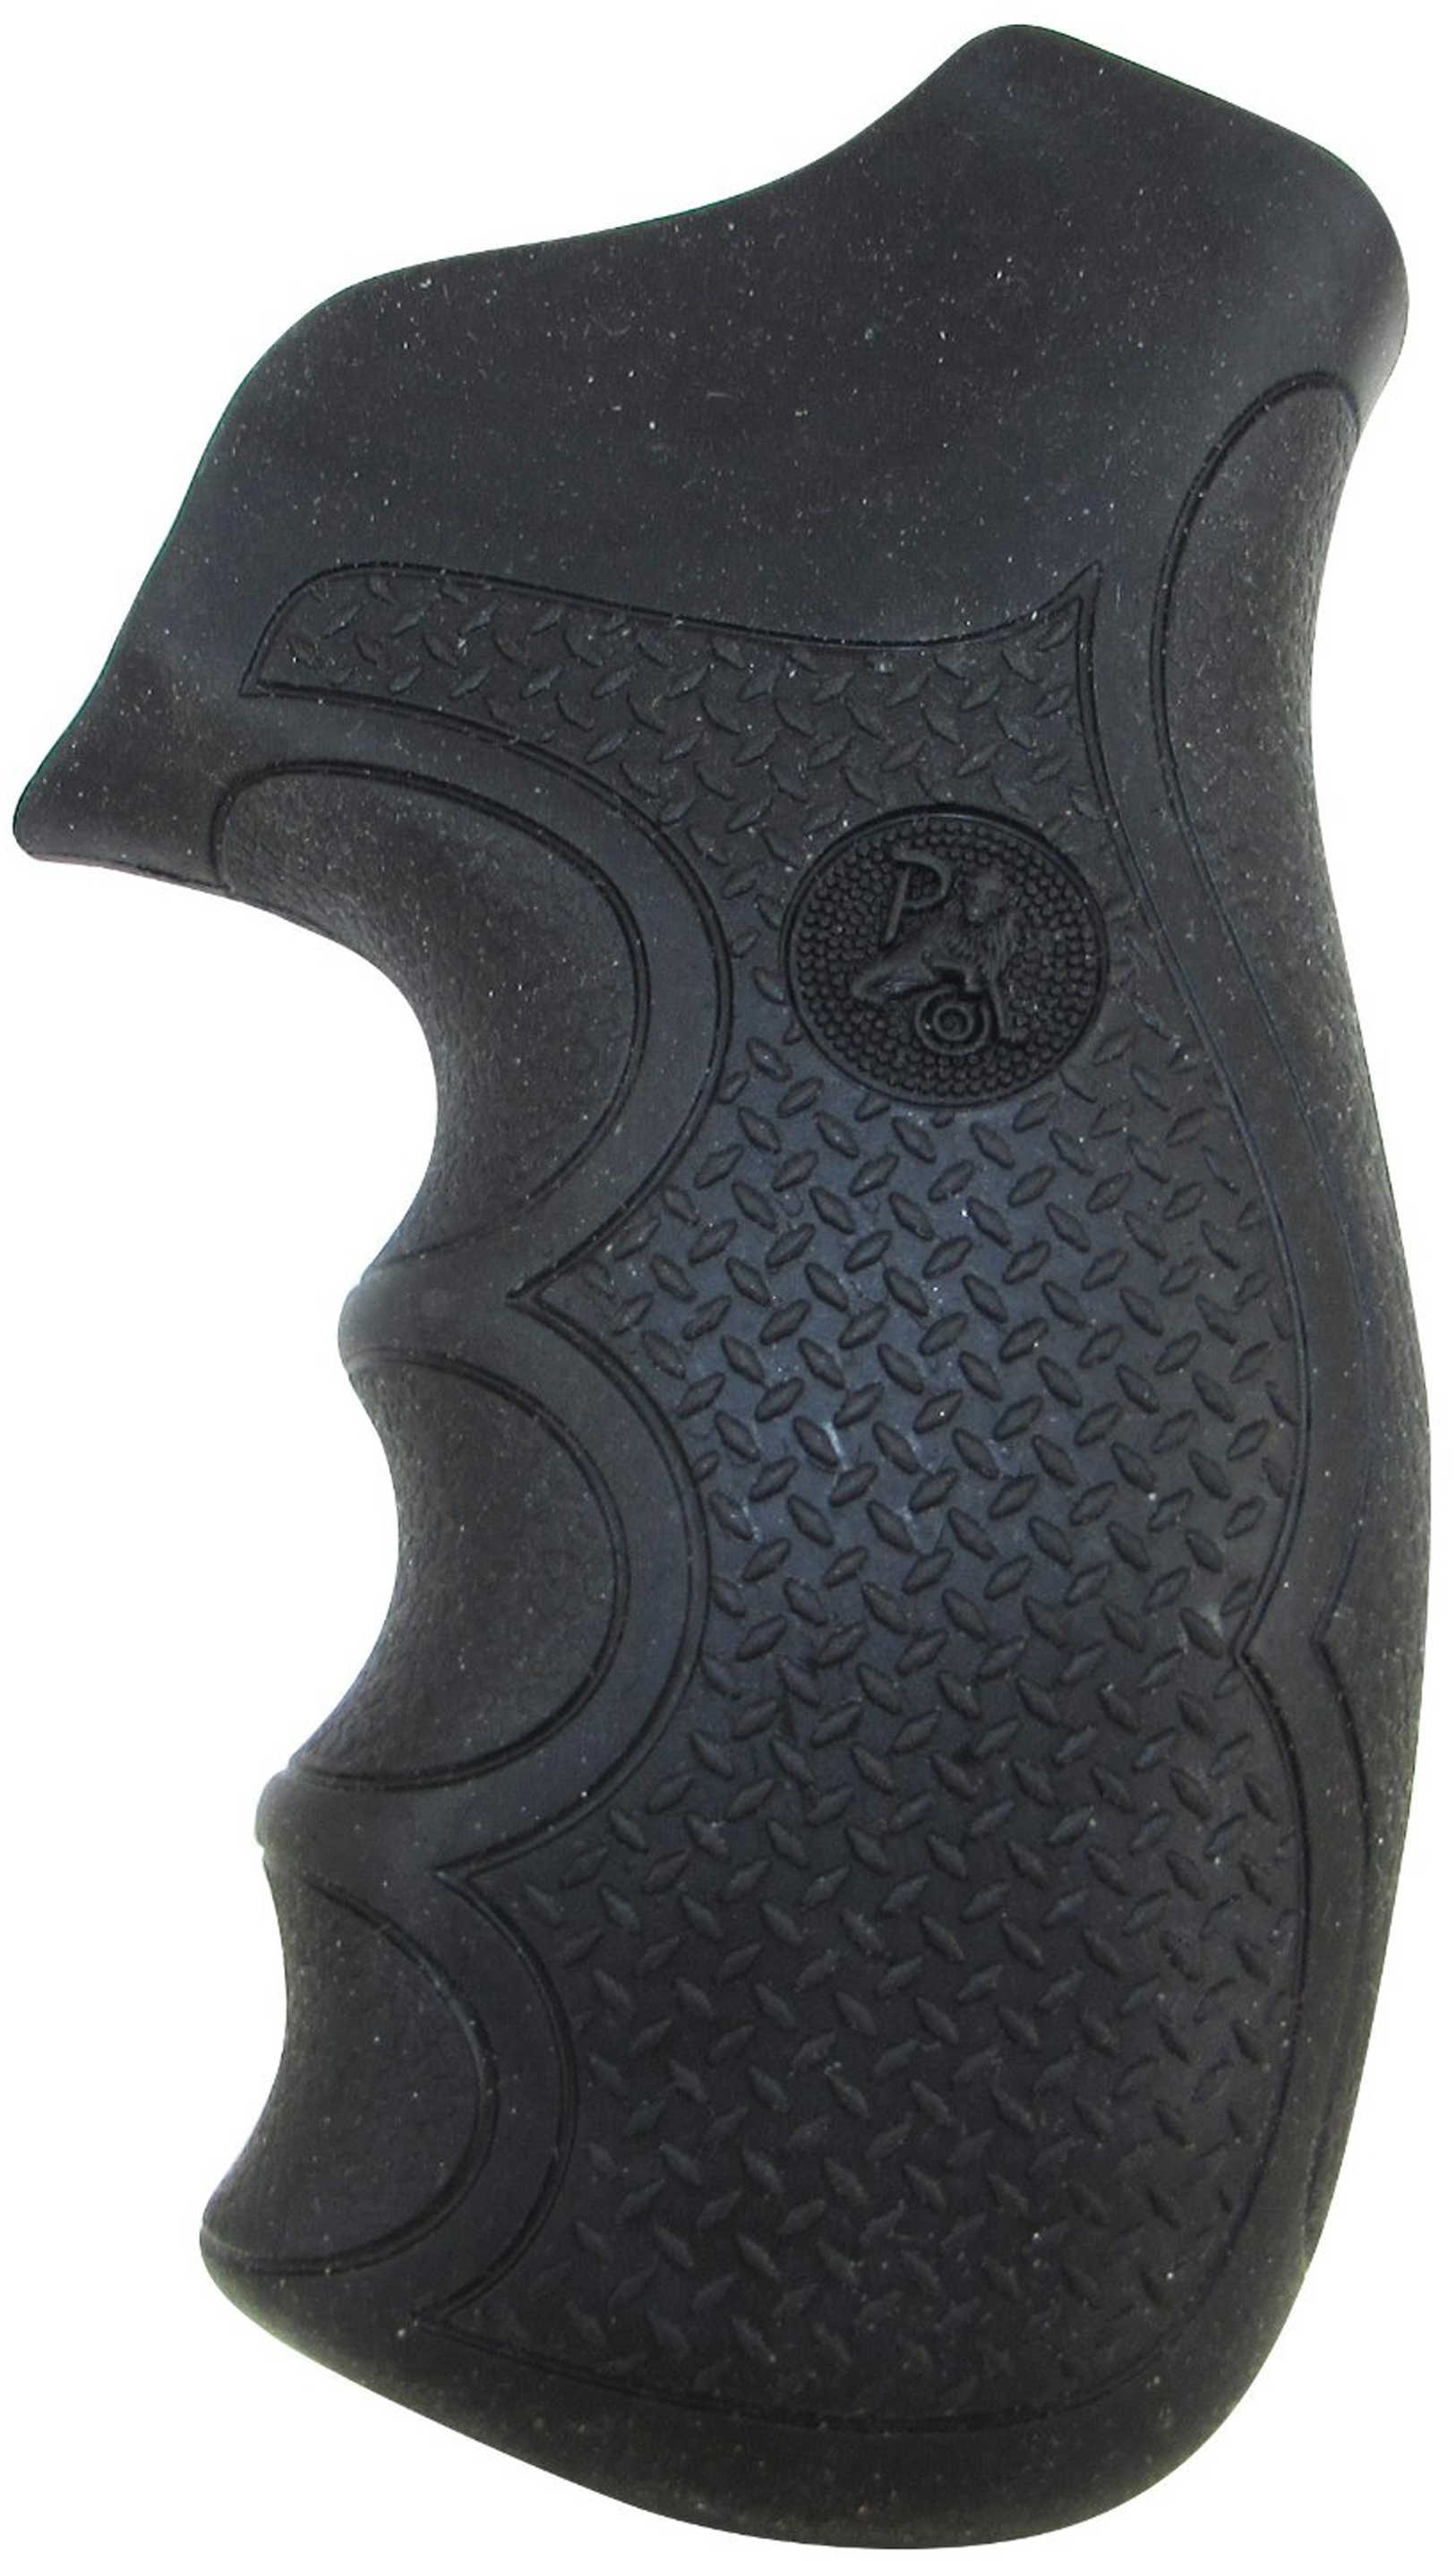 Pachmayr 02484 Diamond Pro Grip Ruger® GP-100 Blk Rubber